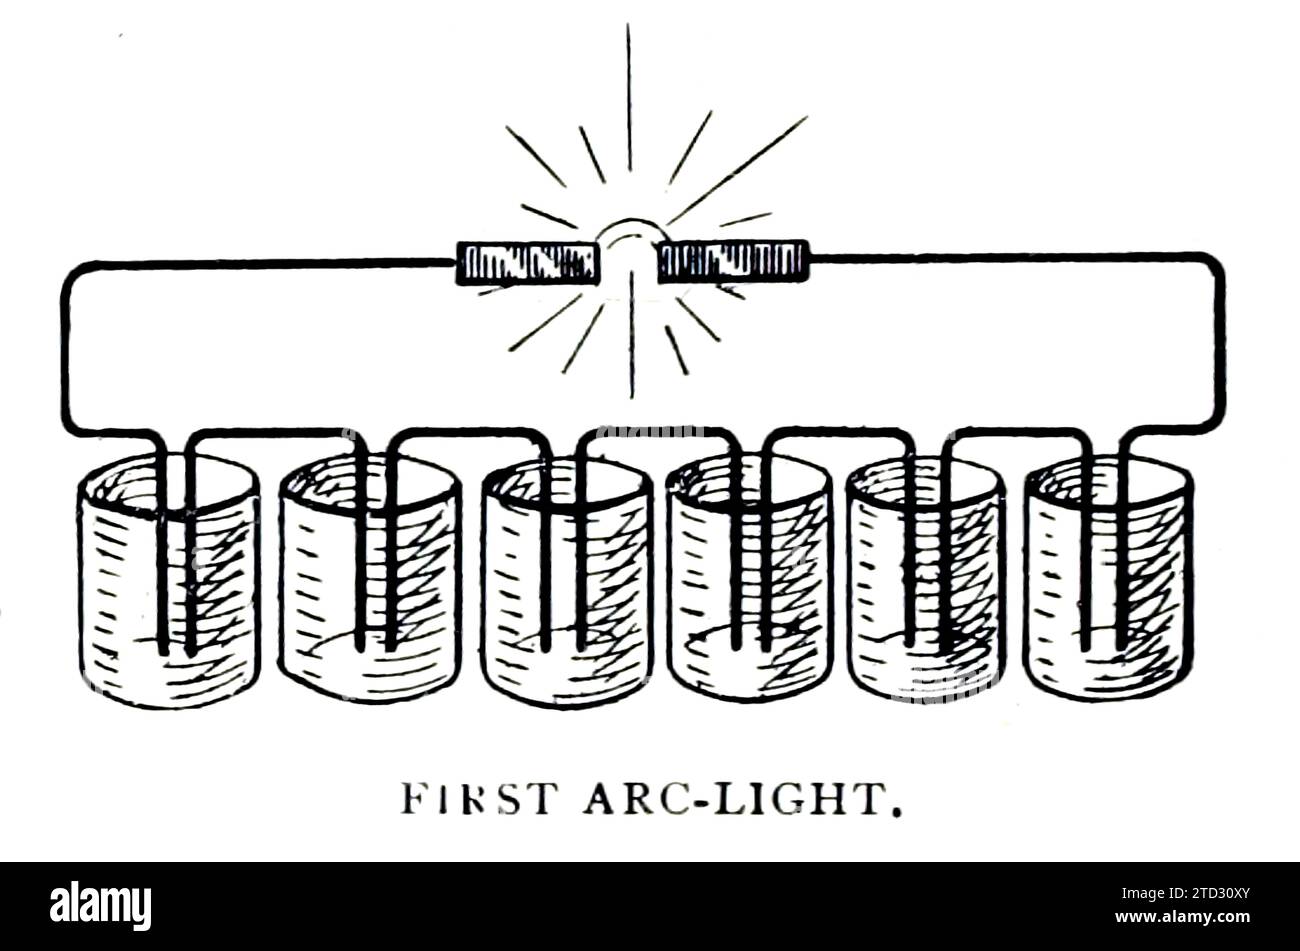 Illustration of the first arc light, which was battery operated. From 'Beginnings and Future of the Arc Lamp ' by S M Hamill, from The Engineering Magazine, Volume VII, 1894. Stock Photo